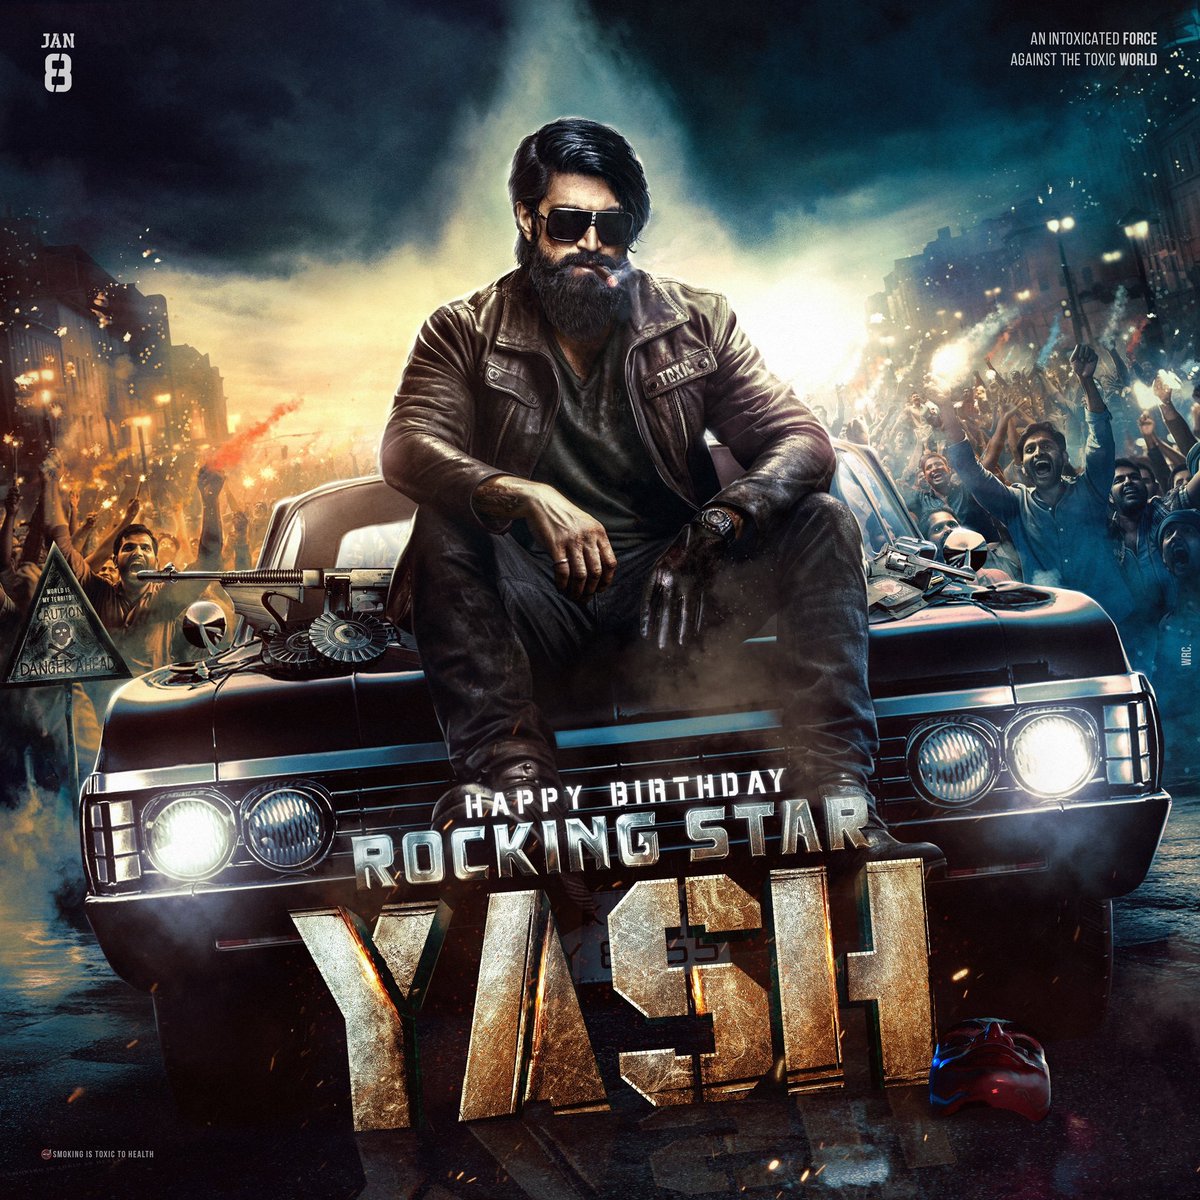 Monster of Kanada 🔥😎 Here's the Much Awaited CDP to celebrate the Day of a Revolutionary Man @TheNameIsYash 💗 #YashBirthdayCDP